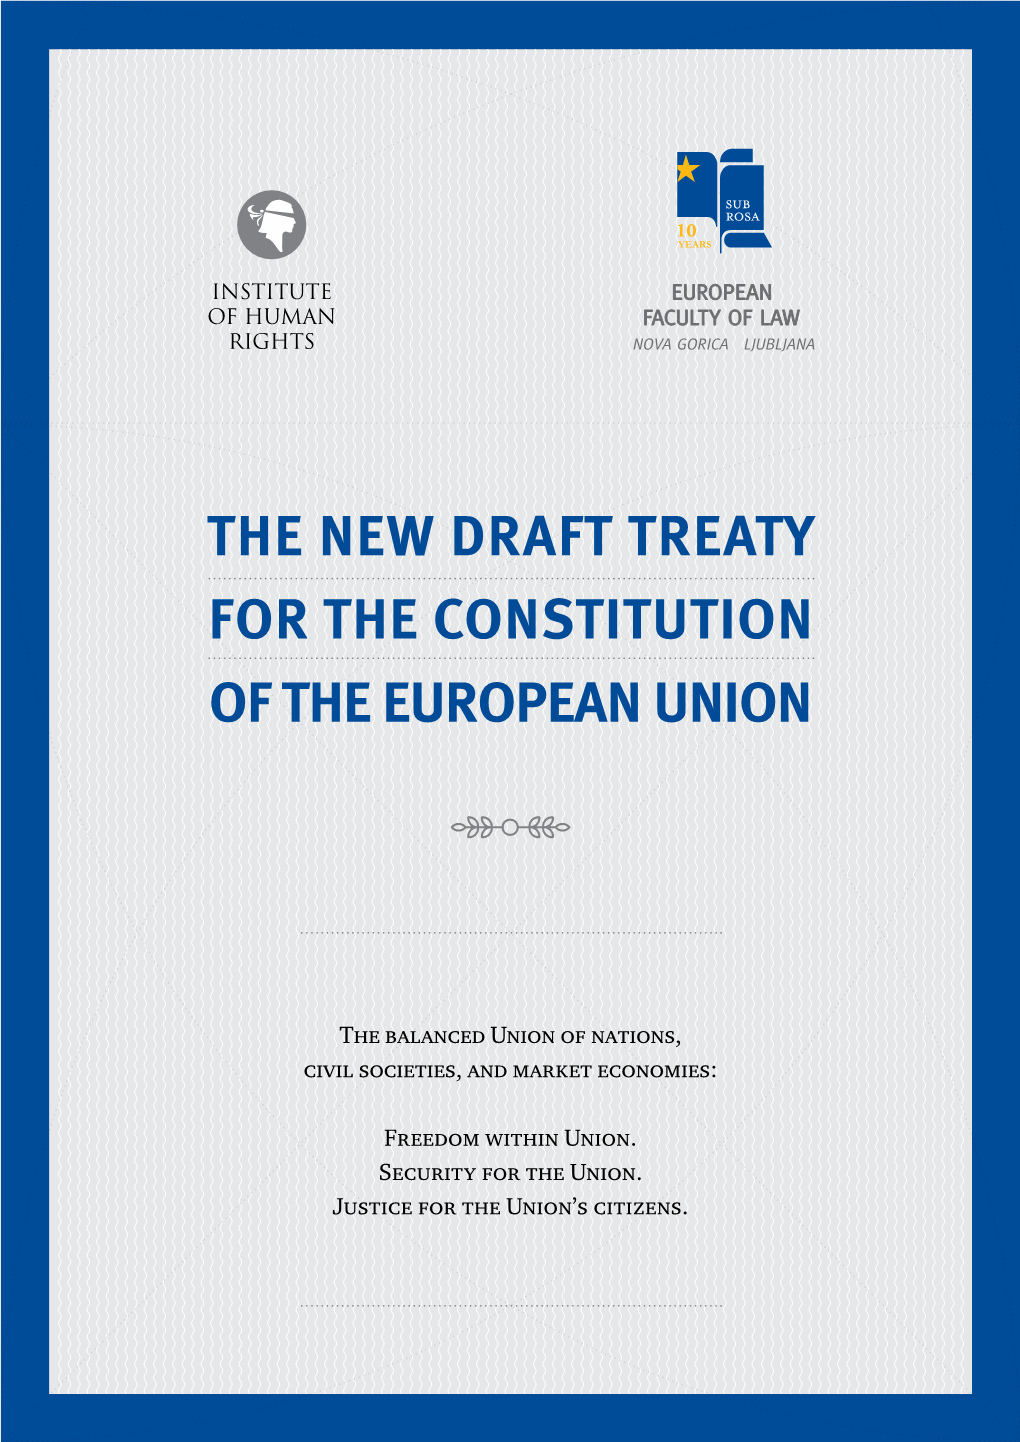 The New Draft Treaty for the Constitution of the European Union